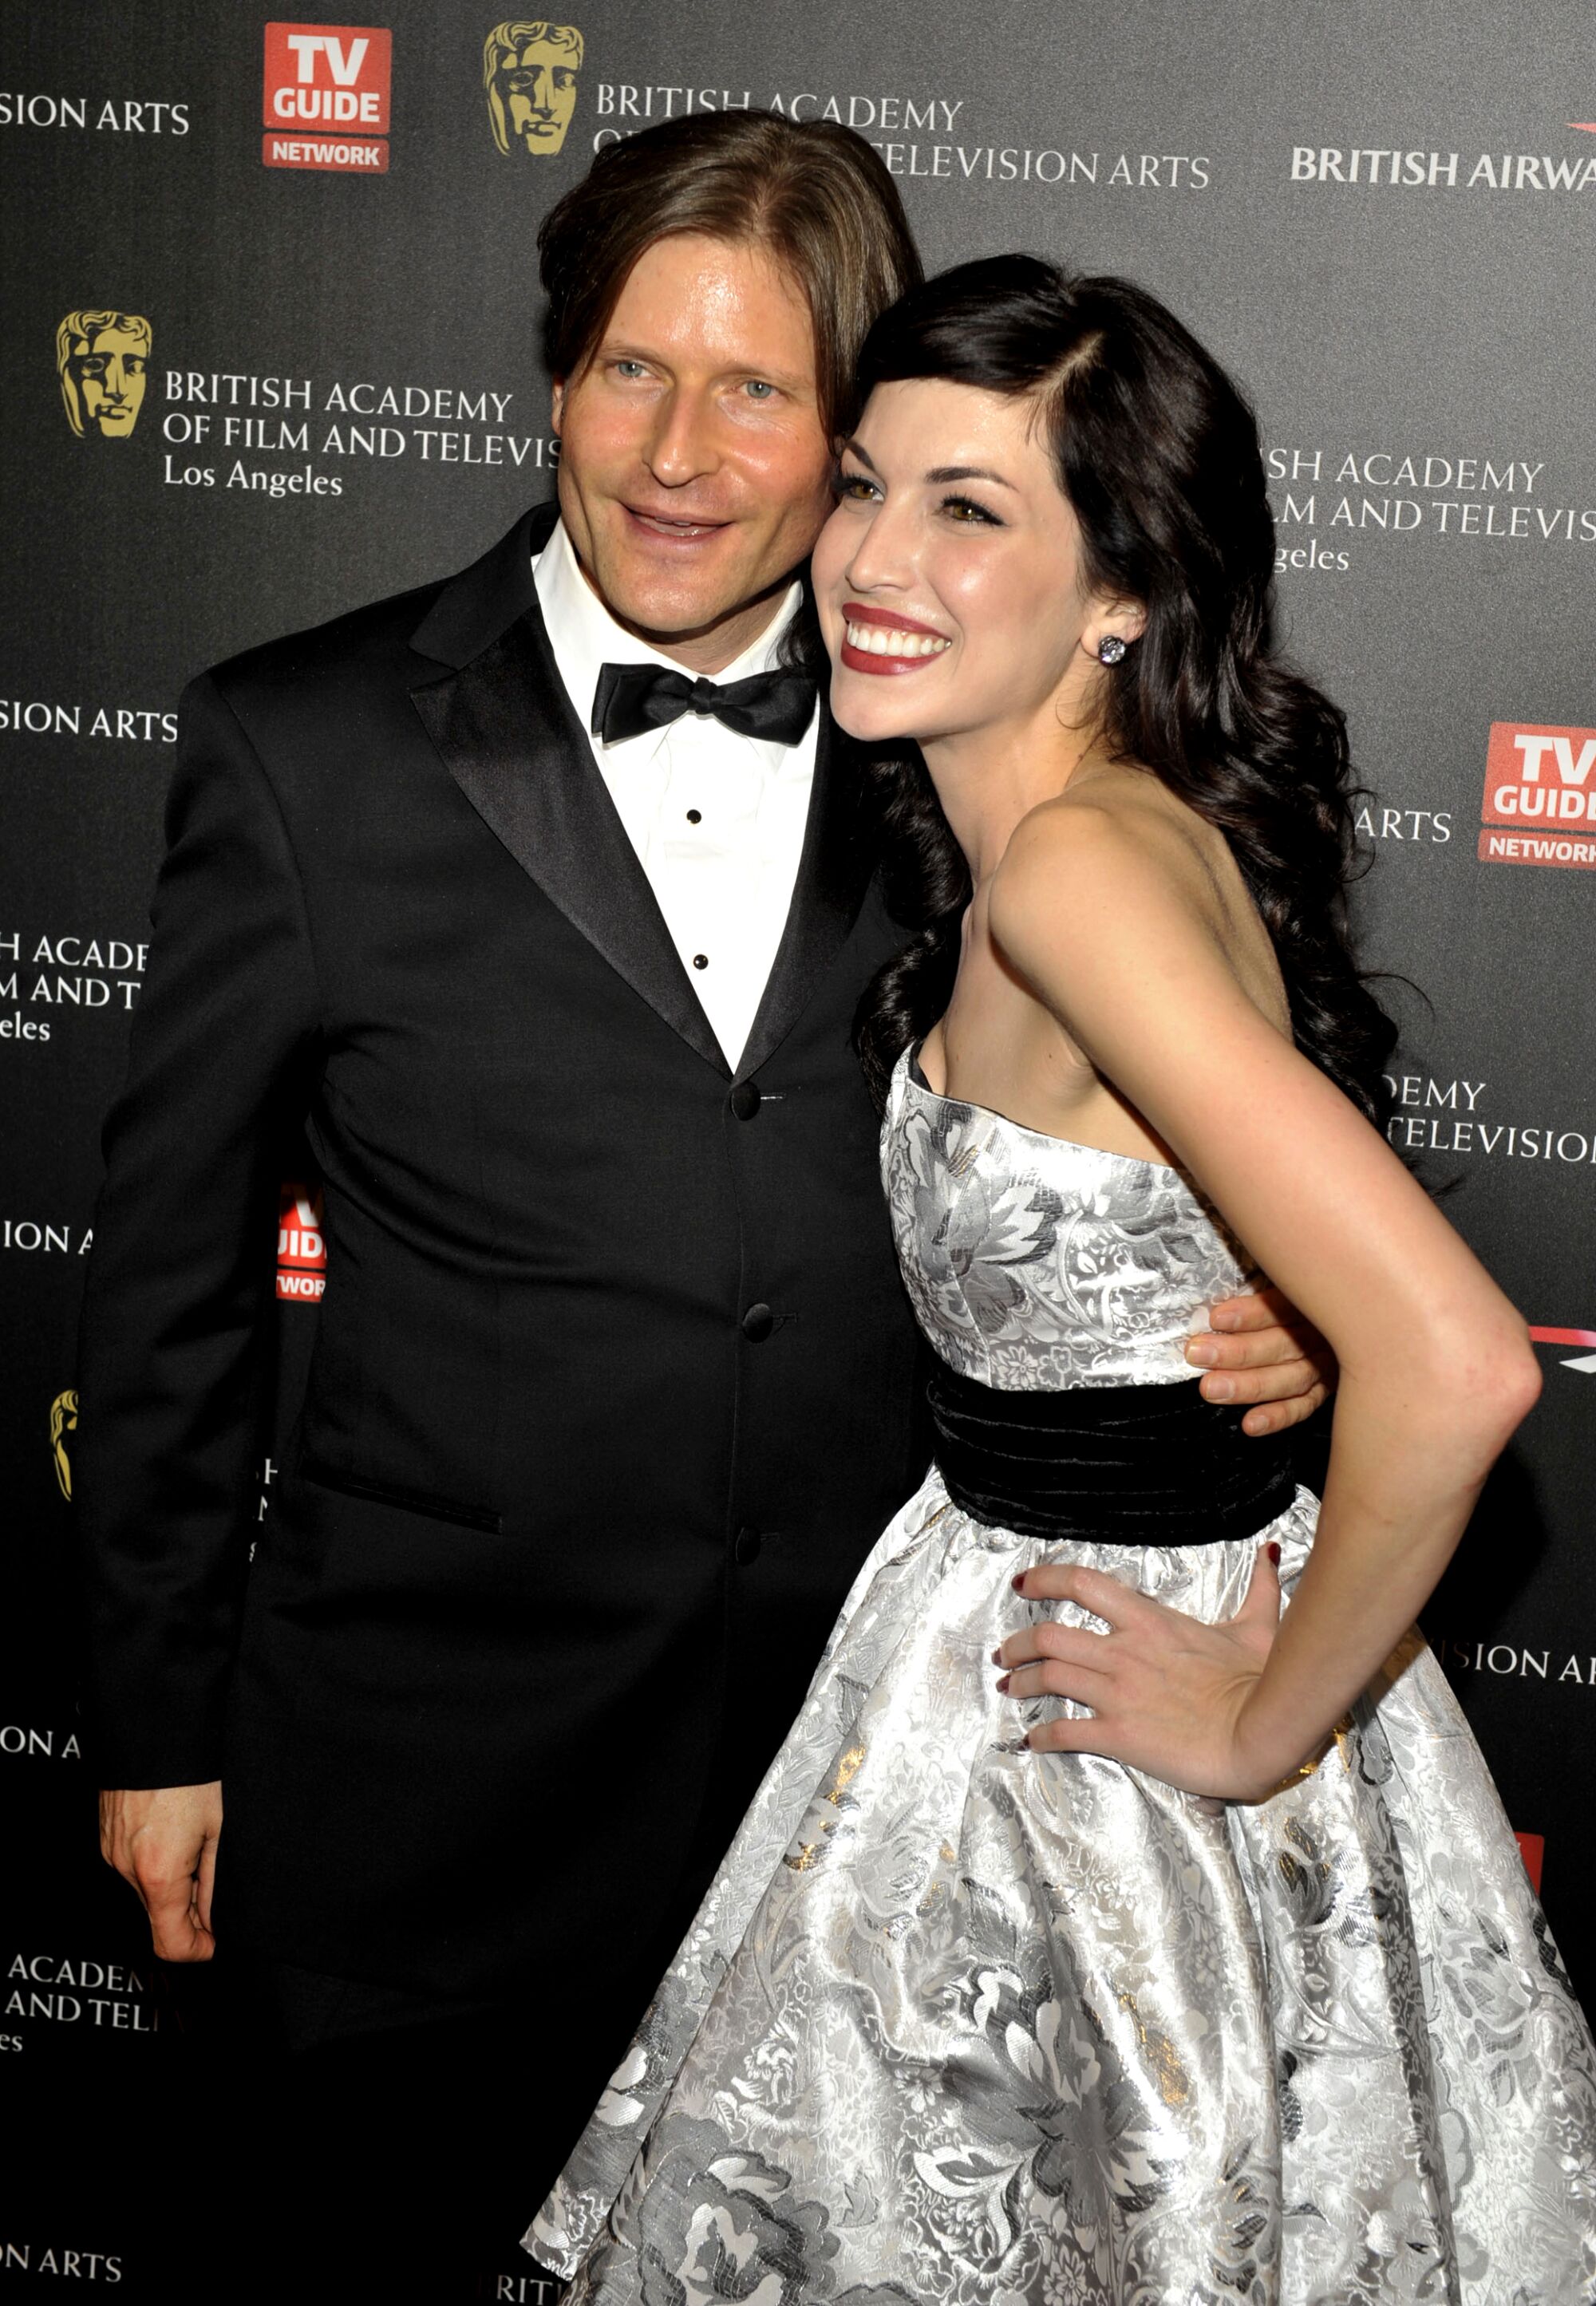 Stevie Ryan poses for a photo with Crispin Glover 